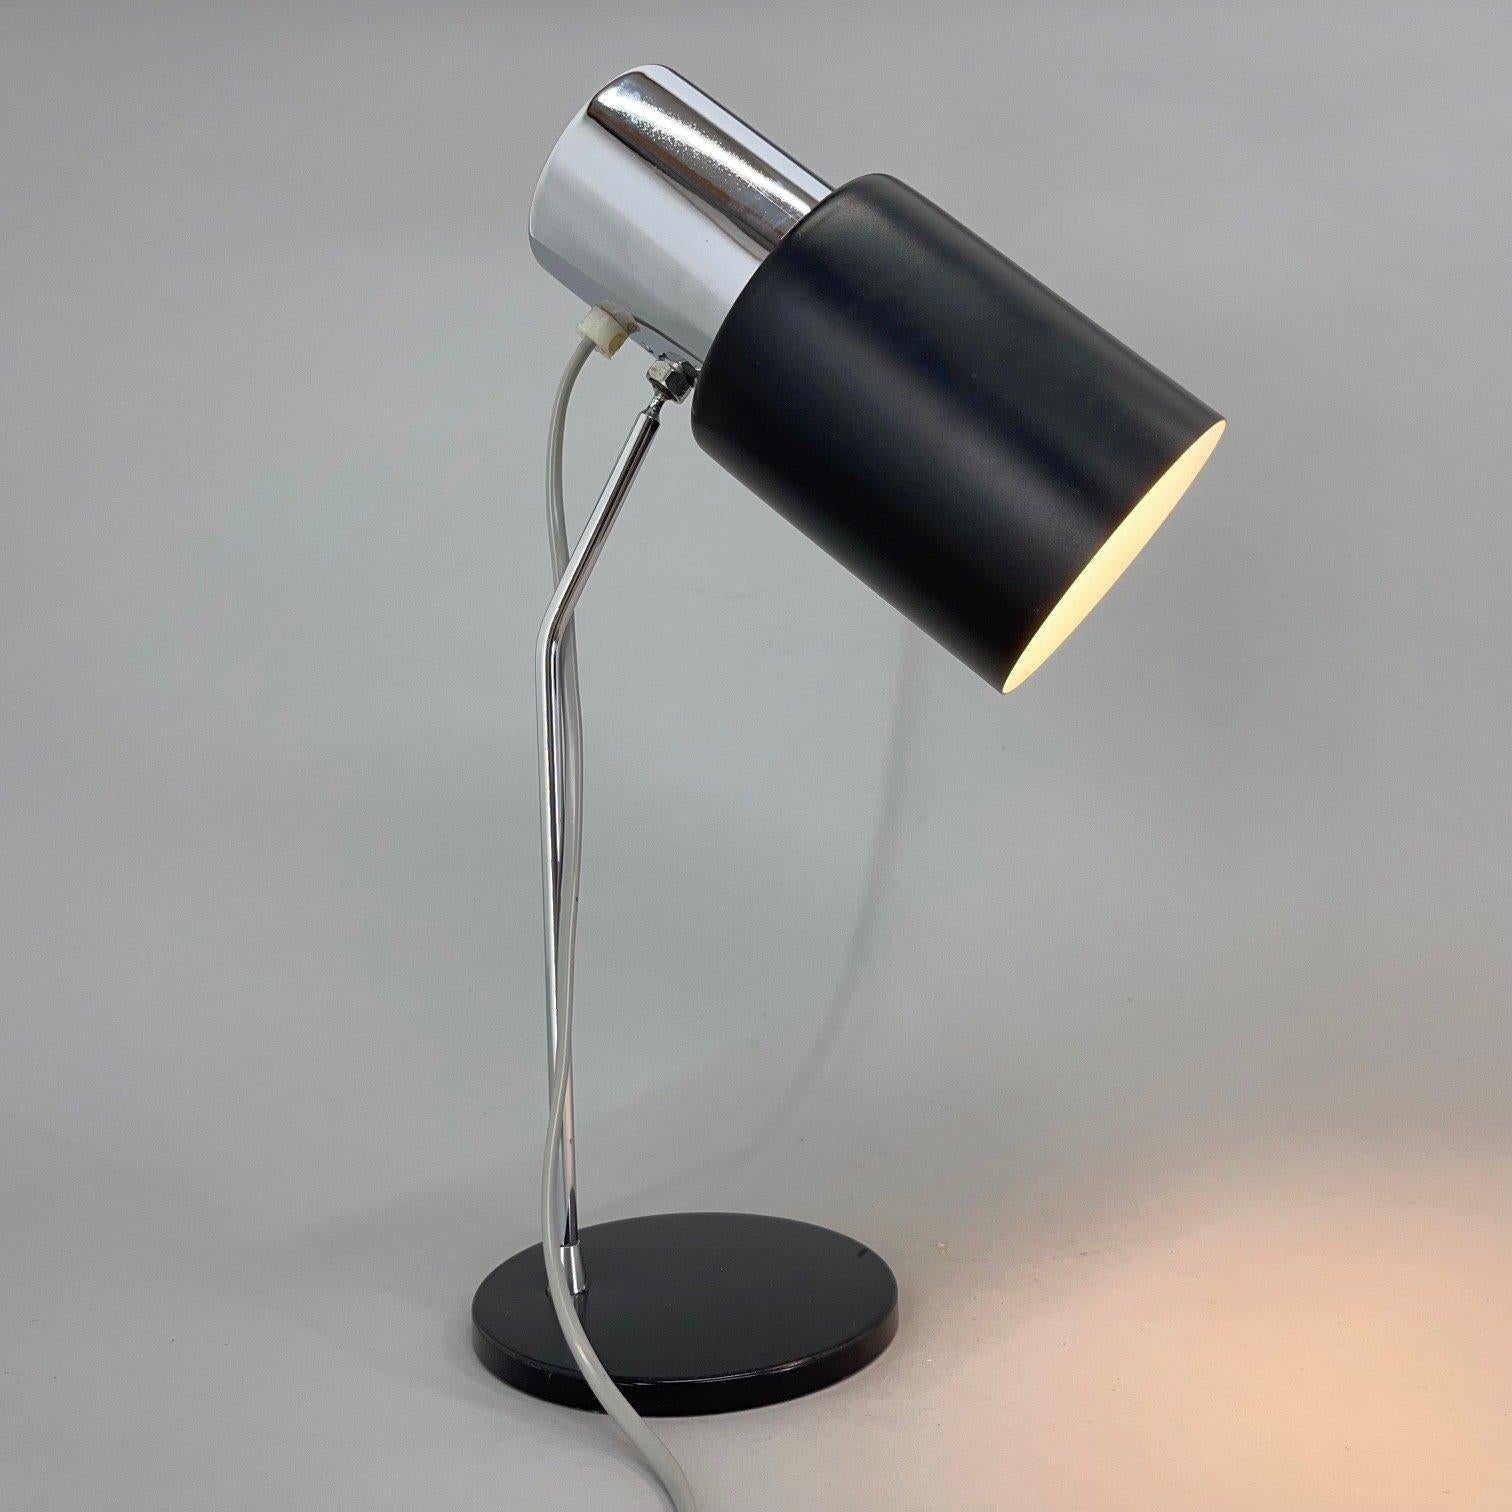 Table lamp with the marking 1636, designed for Napako production in the 1970's by Josef Hurka, one of the most important Czech lighting designers who worked for Napako in Prague from the 1940's. The lamp has an all-metal body with chrome parts and